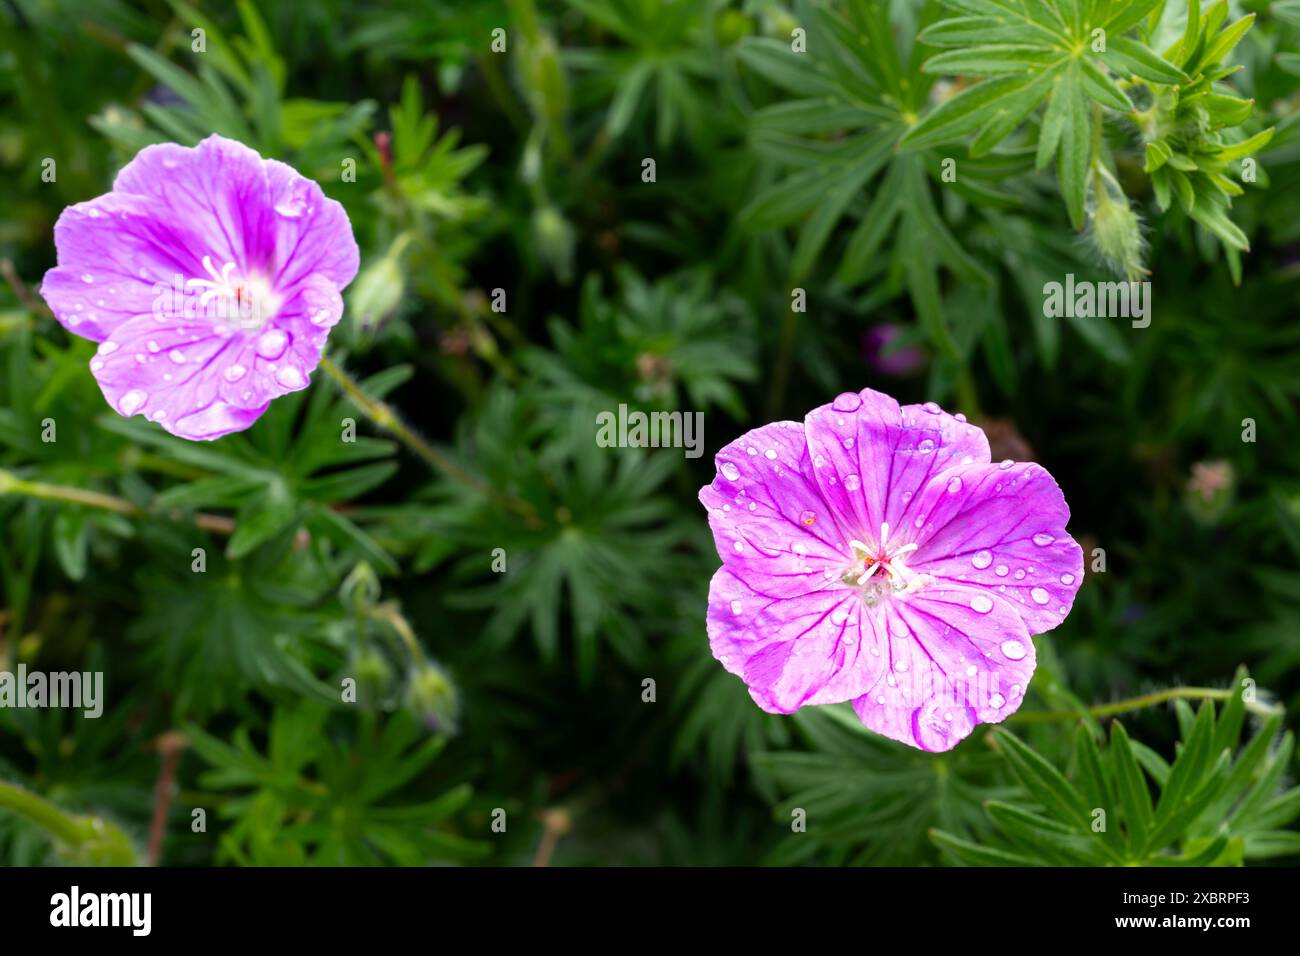 A closeup view of the Bloody Crane's Bill flower Geraniym sanguineum L in a garden in Cornmwall in the UK. Stock Photo